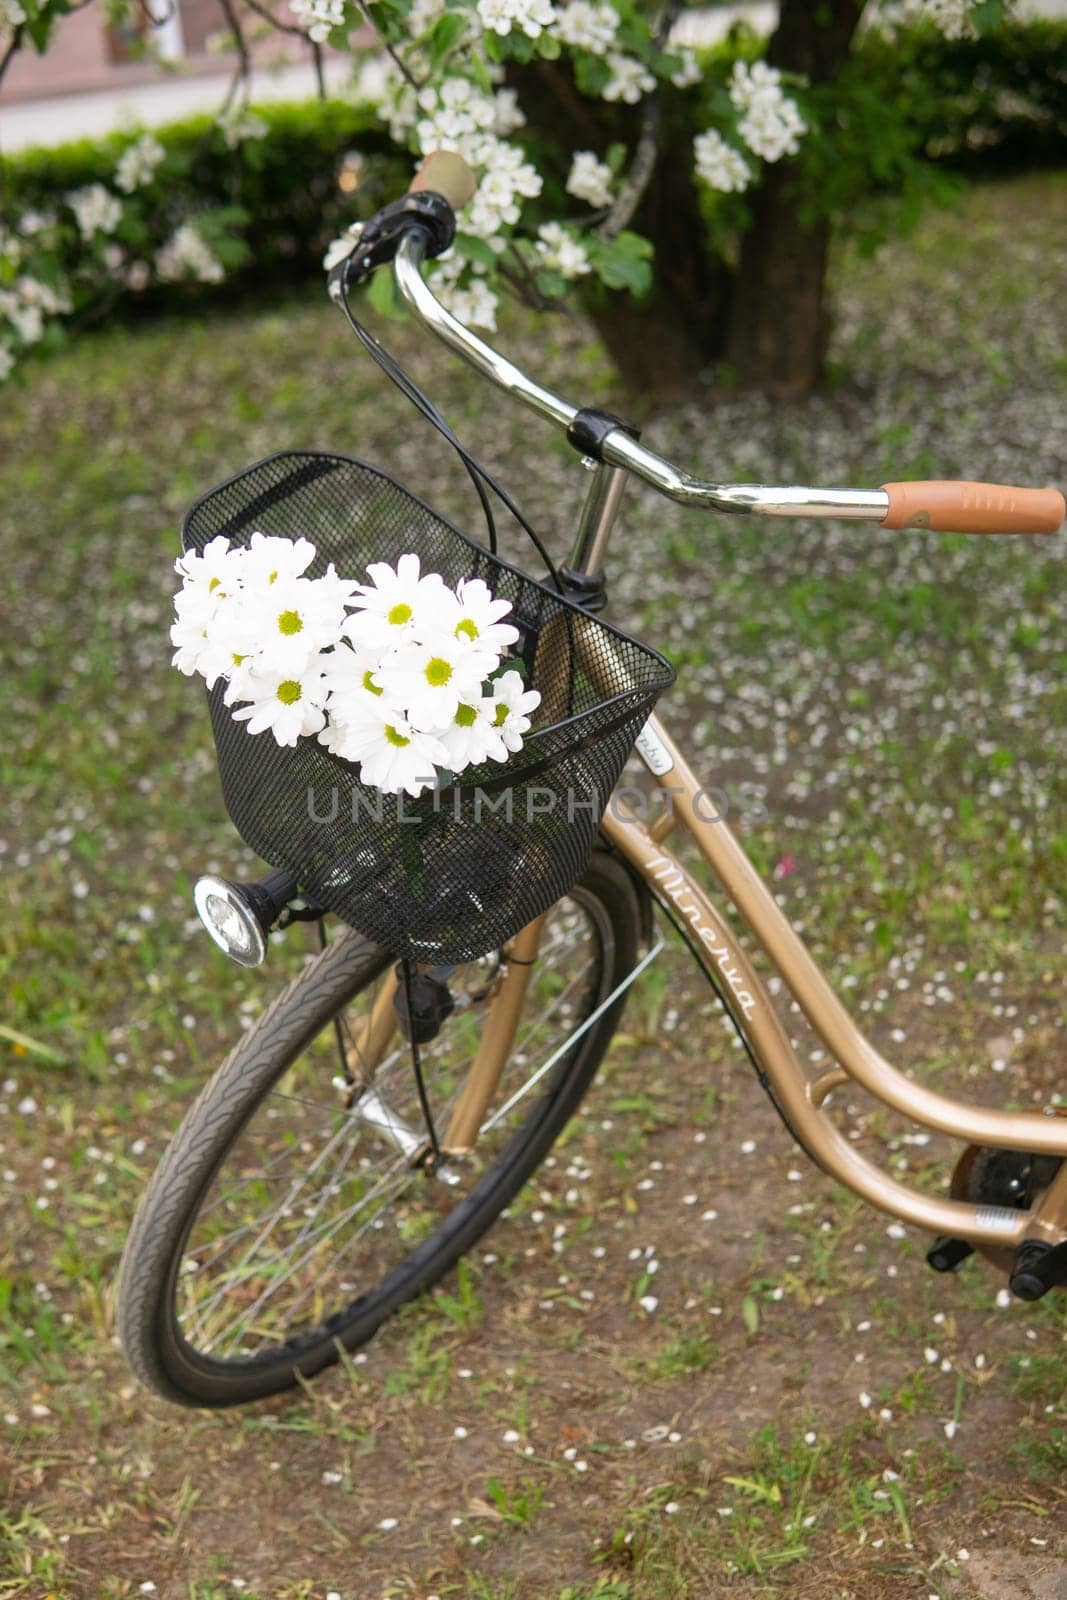 A beautiful retro bike with a wicker basket stands next to a blooming apple tree in the park